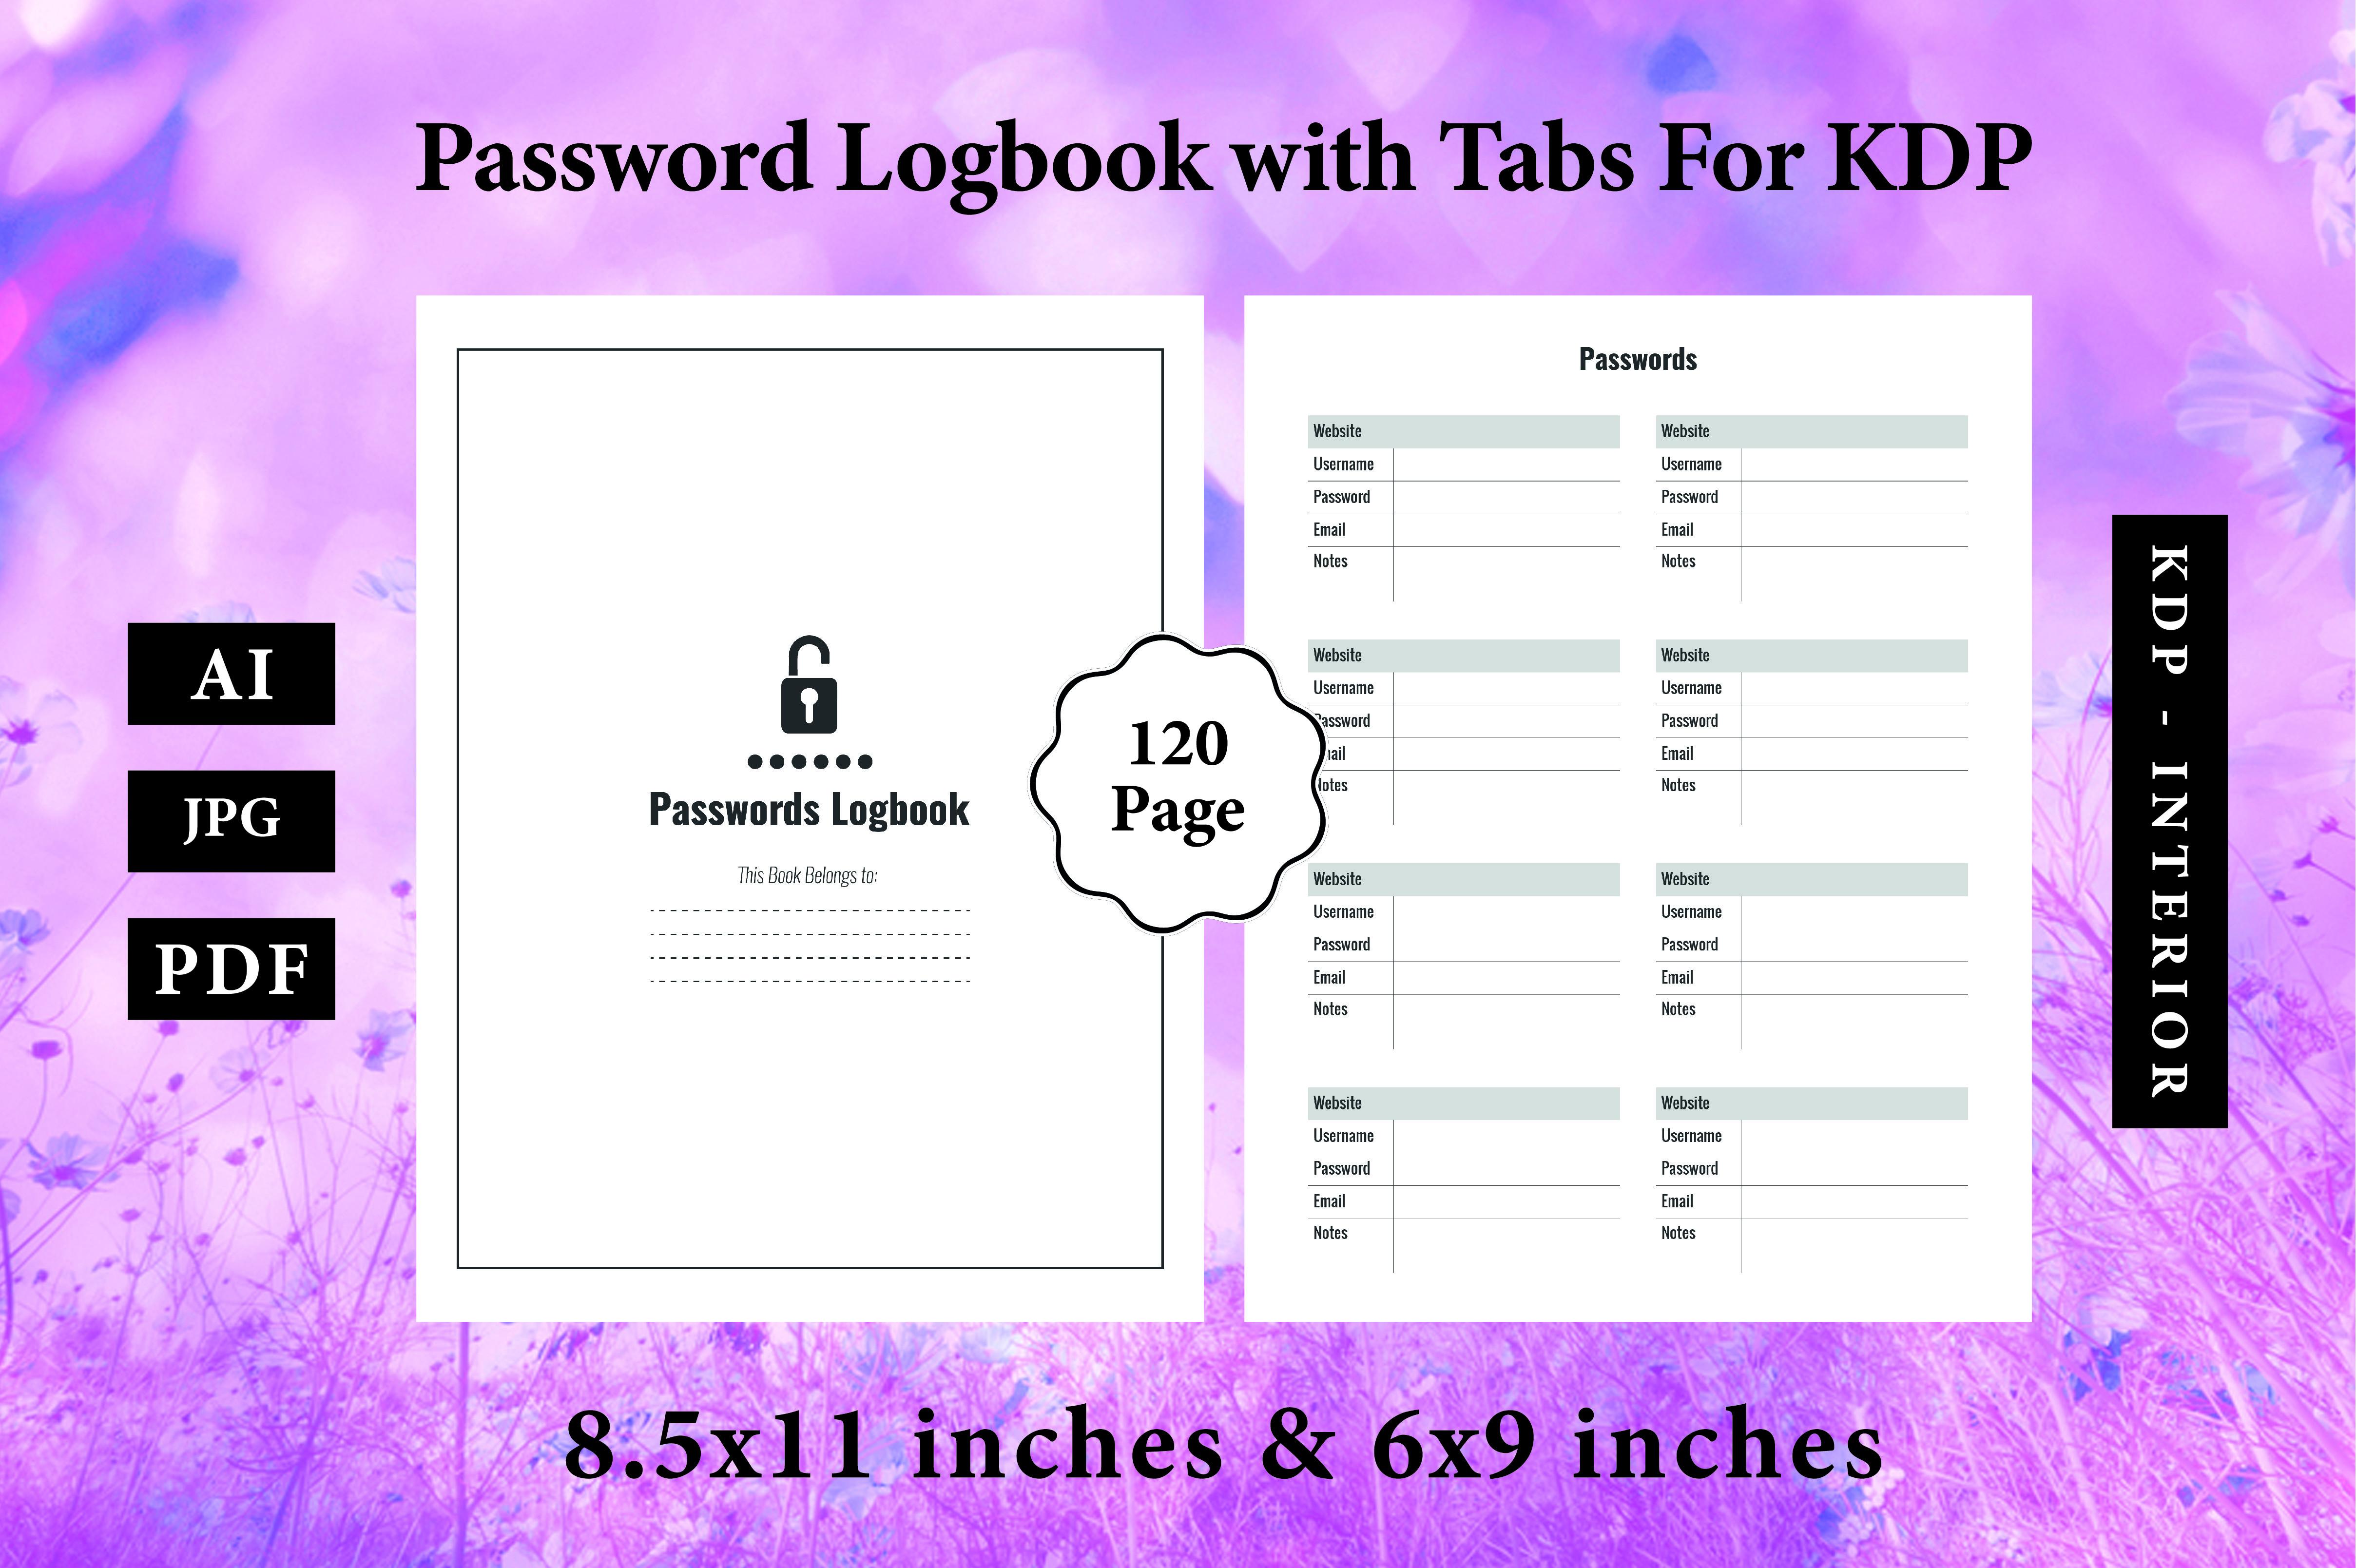 Password Logbook with Tabs for KDP